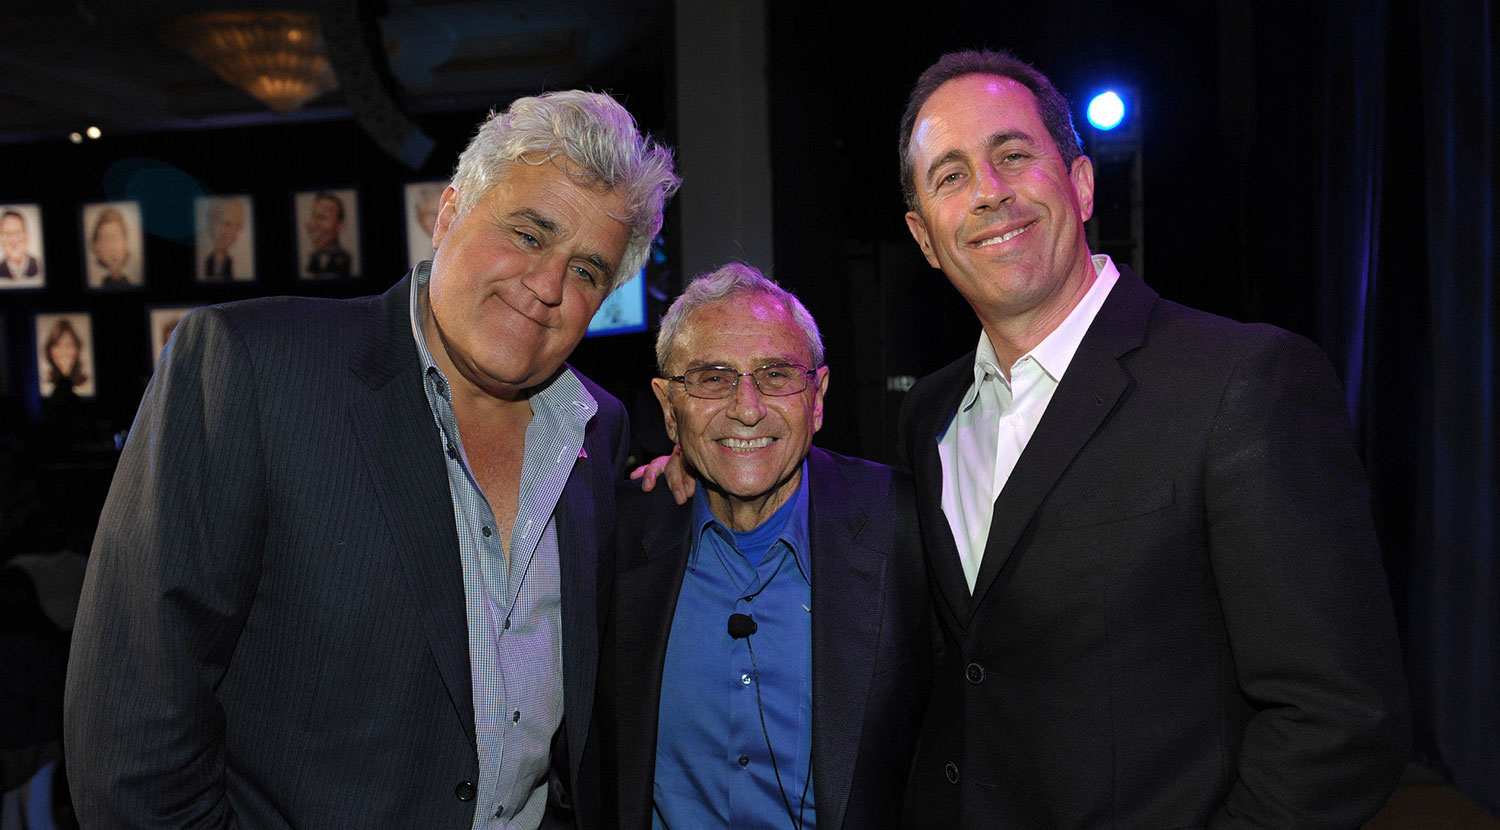 From left: Jay Leno, legendary talent manager George Shapiro, and Jerry Seinfeld 